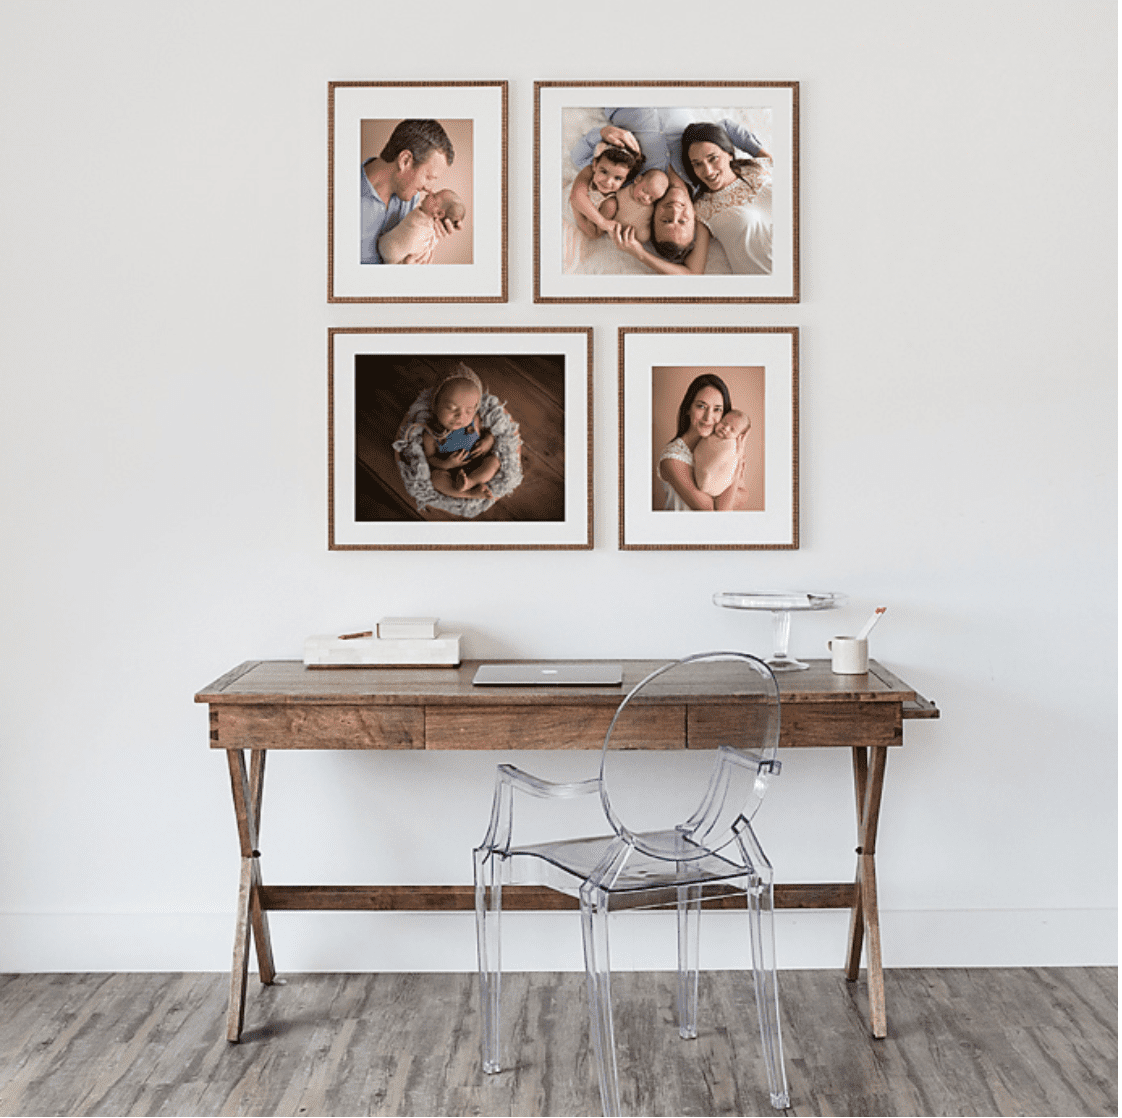 Sample of a wall with frames of south florida newborn photos